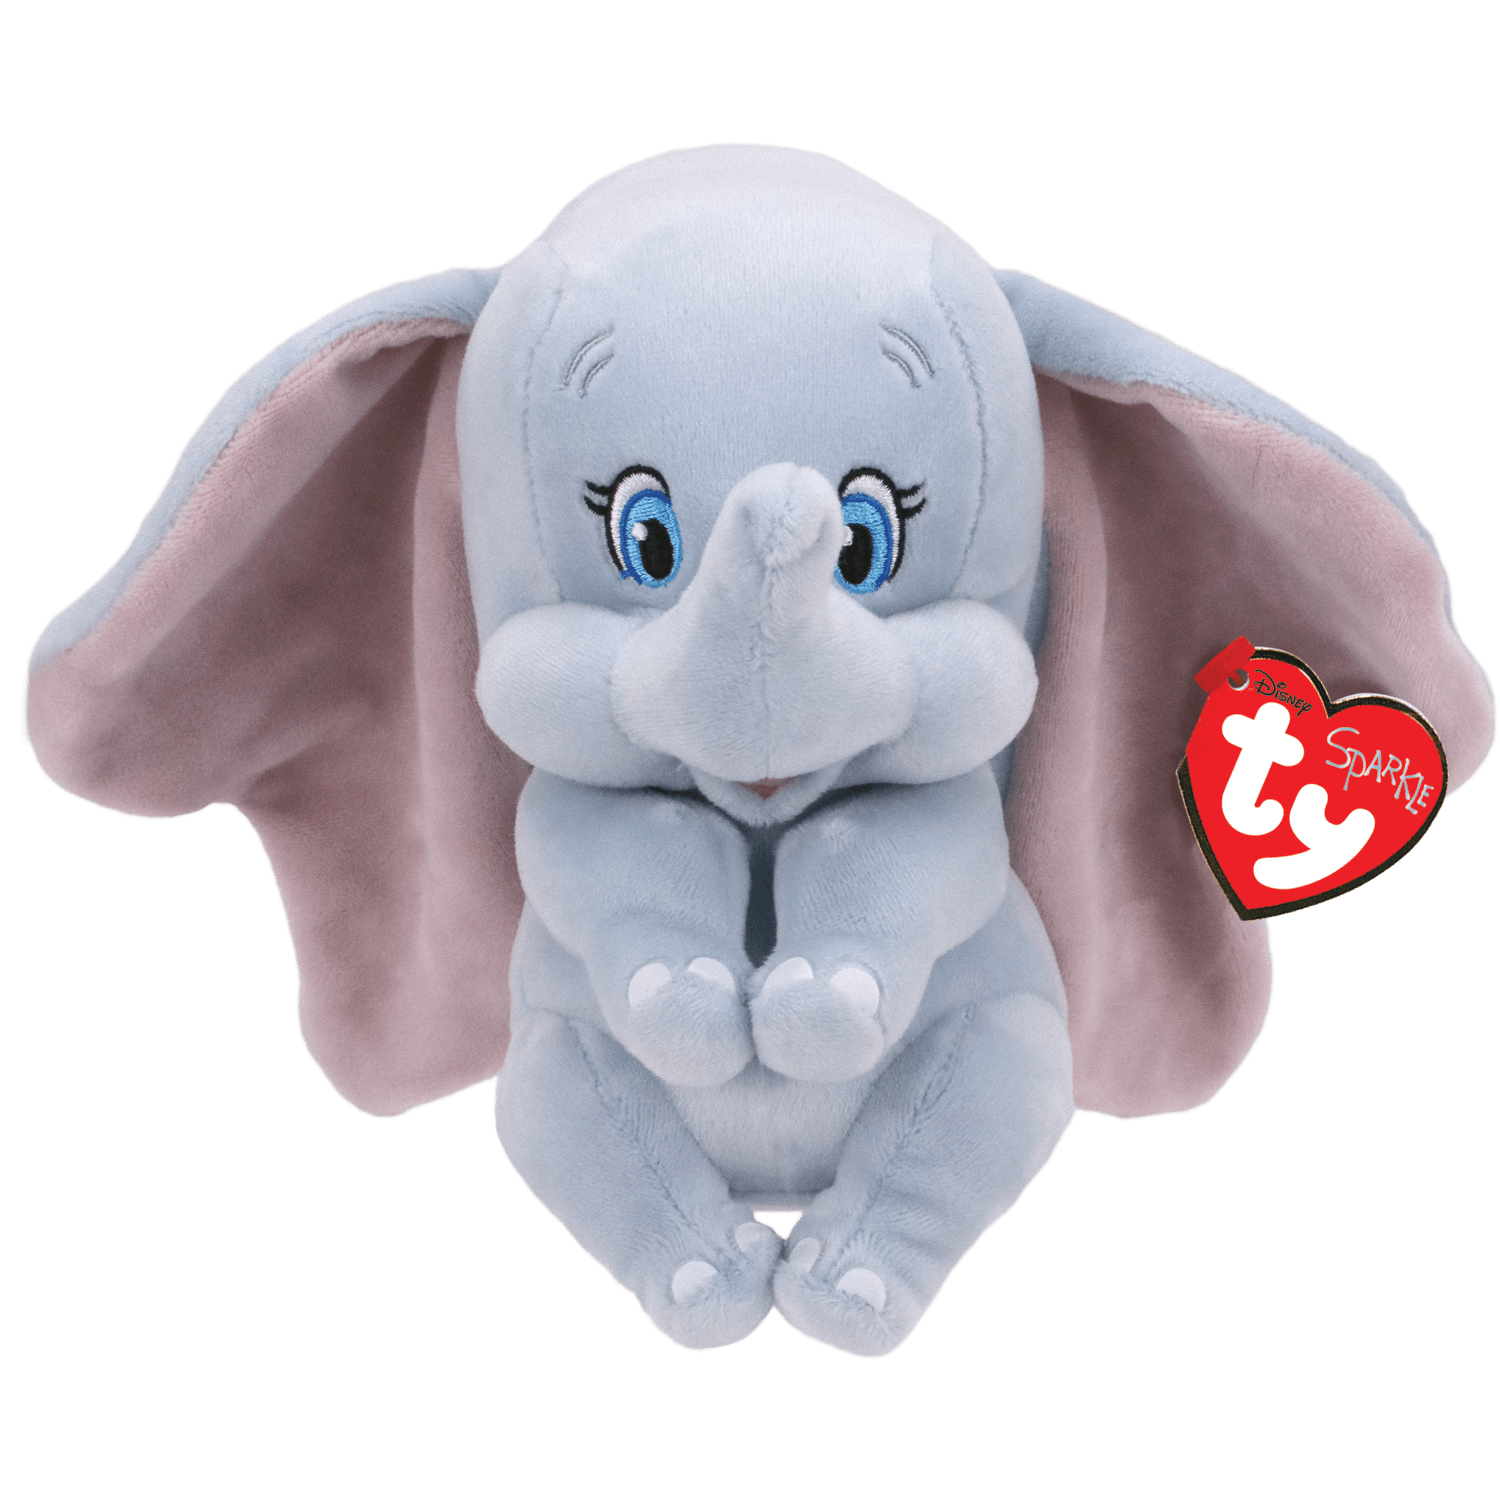 https://cdn.shopify.com/s/files/1/1300/6865/products/Ty-Sparkle-Beanie-Boos-Collection-Disney-Classic-Dumbo-8-TY-Inc.png?v=1633127263&width=1500